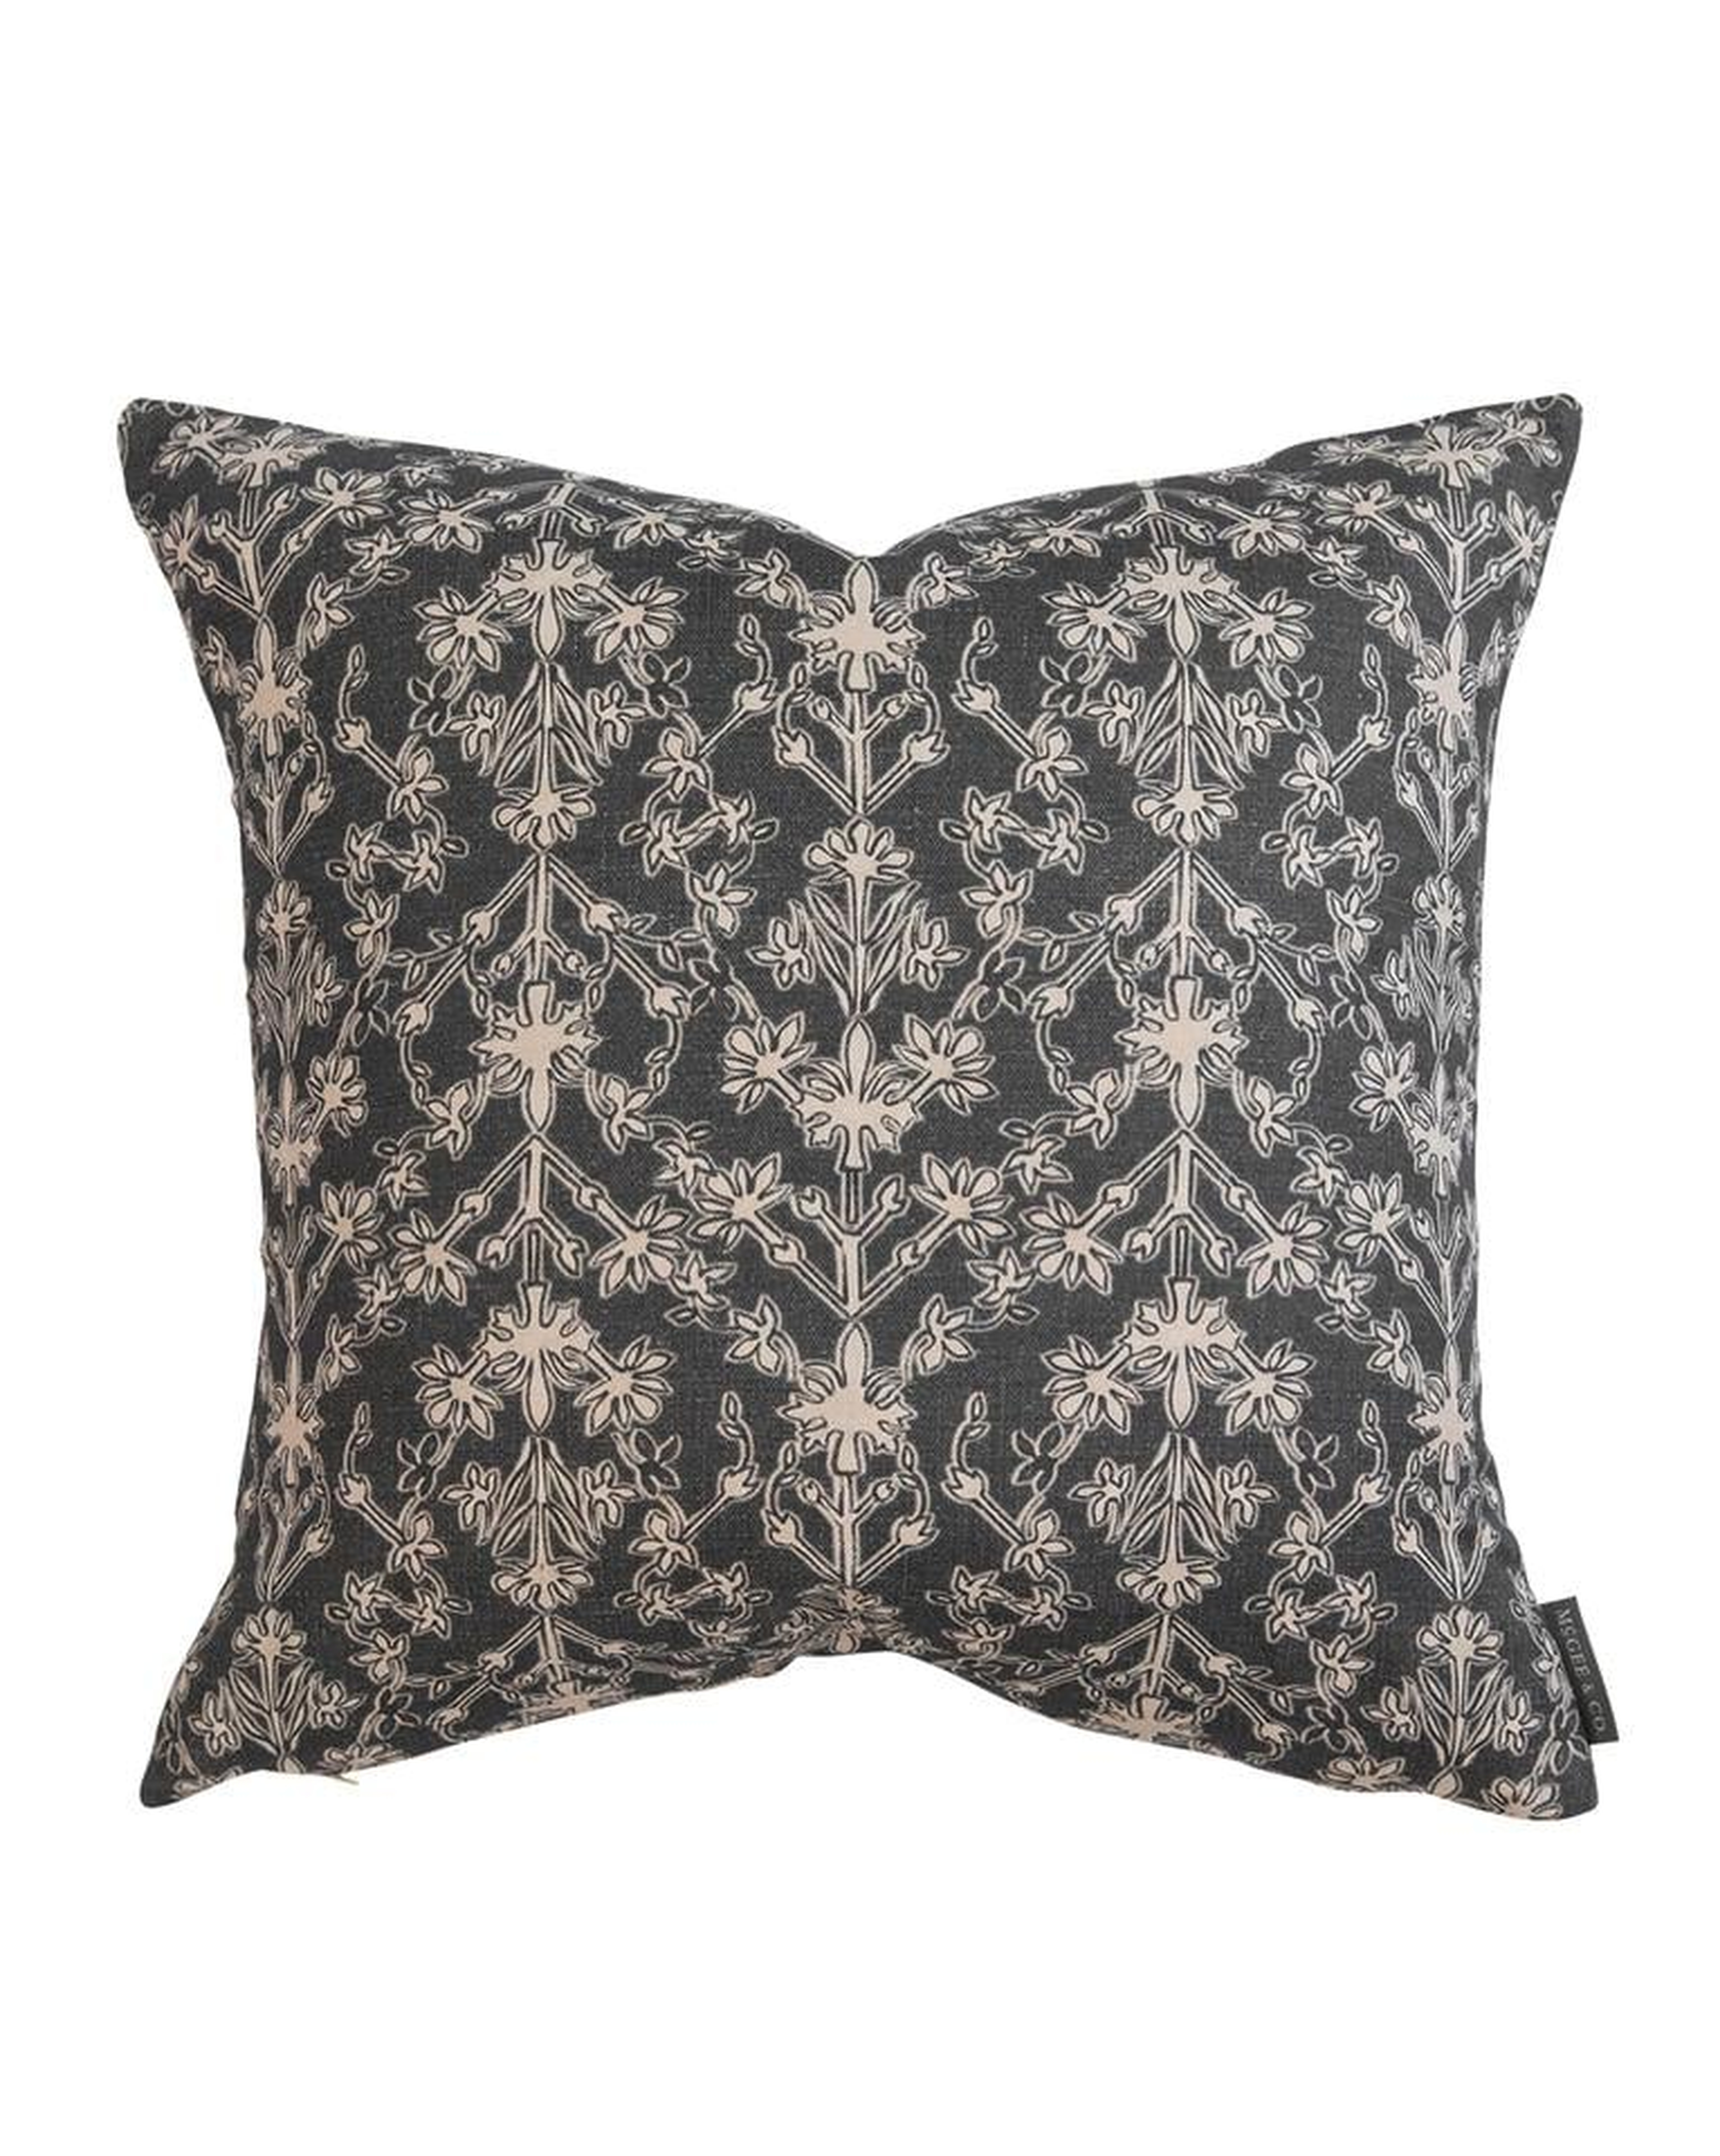 Baylee Floral Pillow Cover 24x24 - McGee & Co.